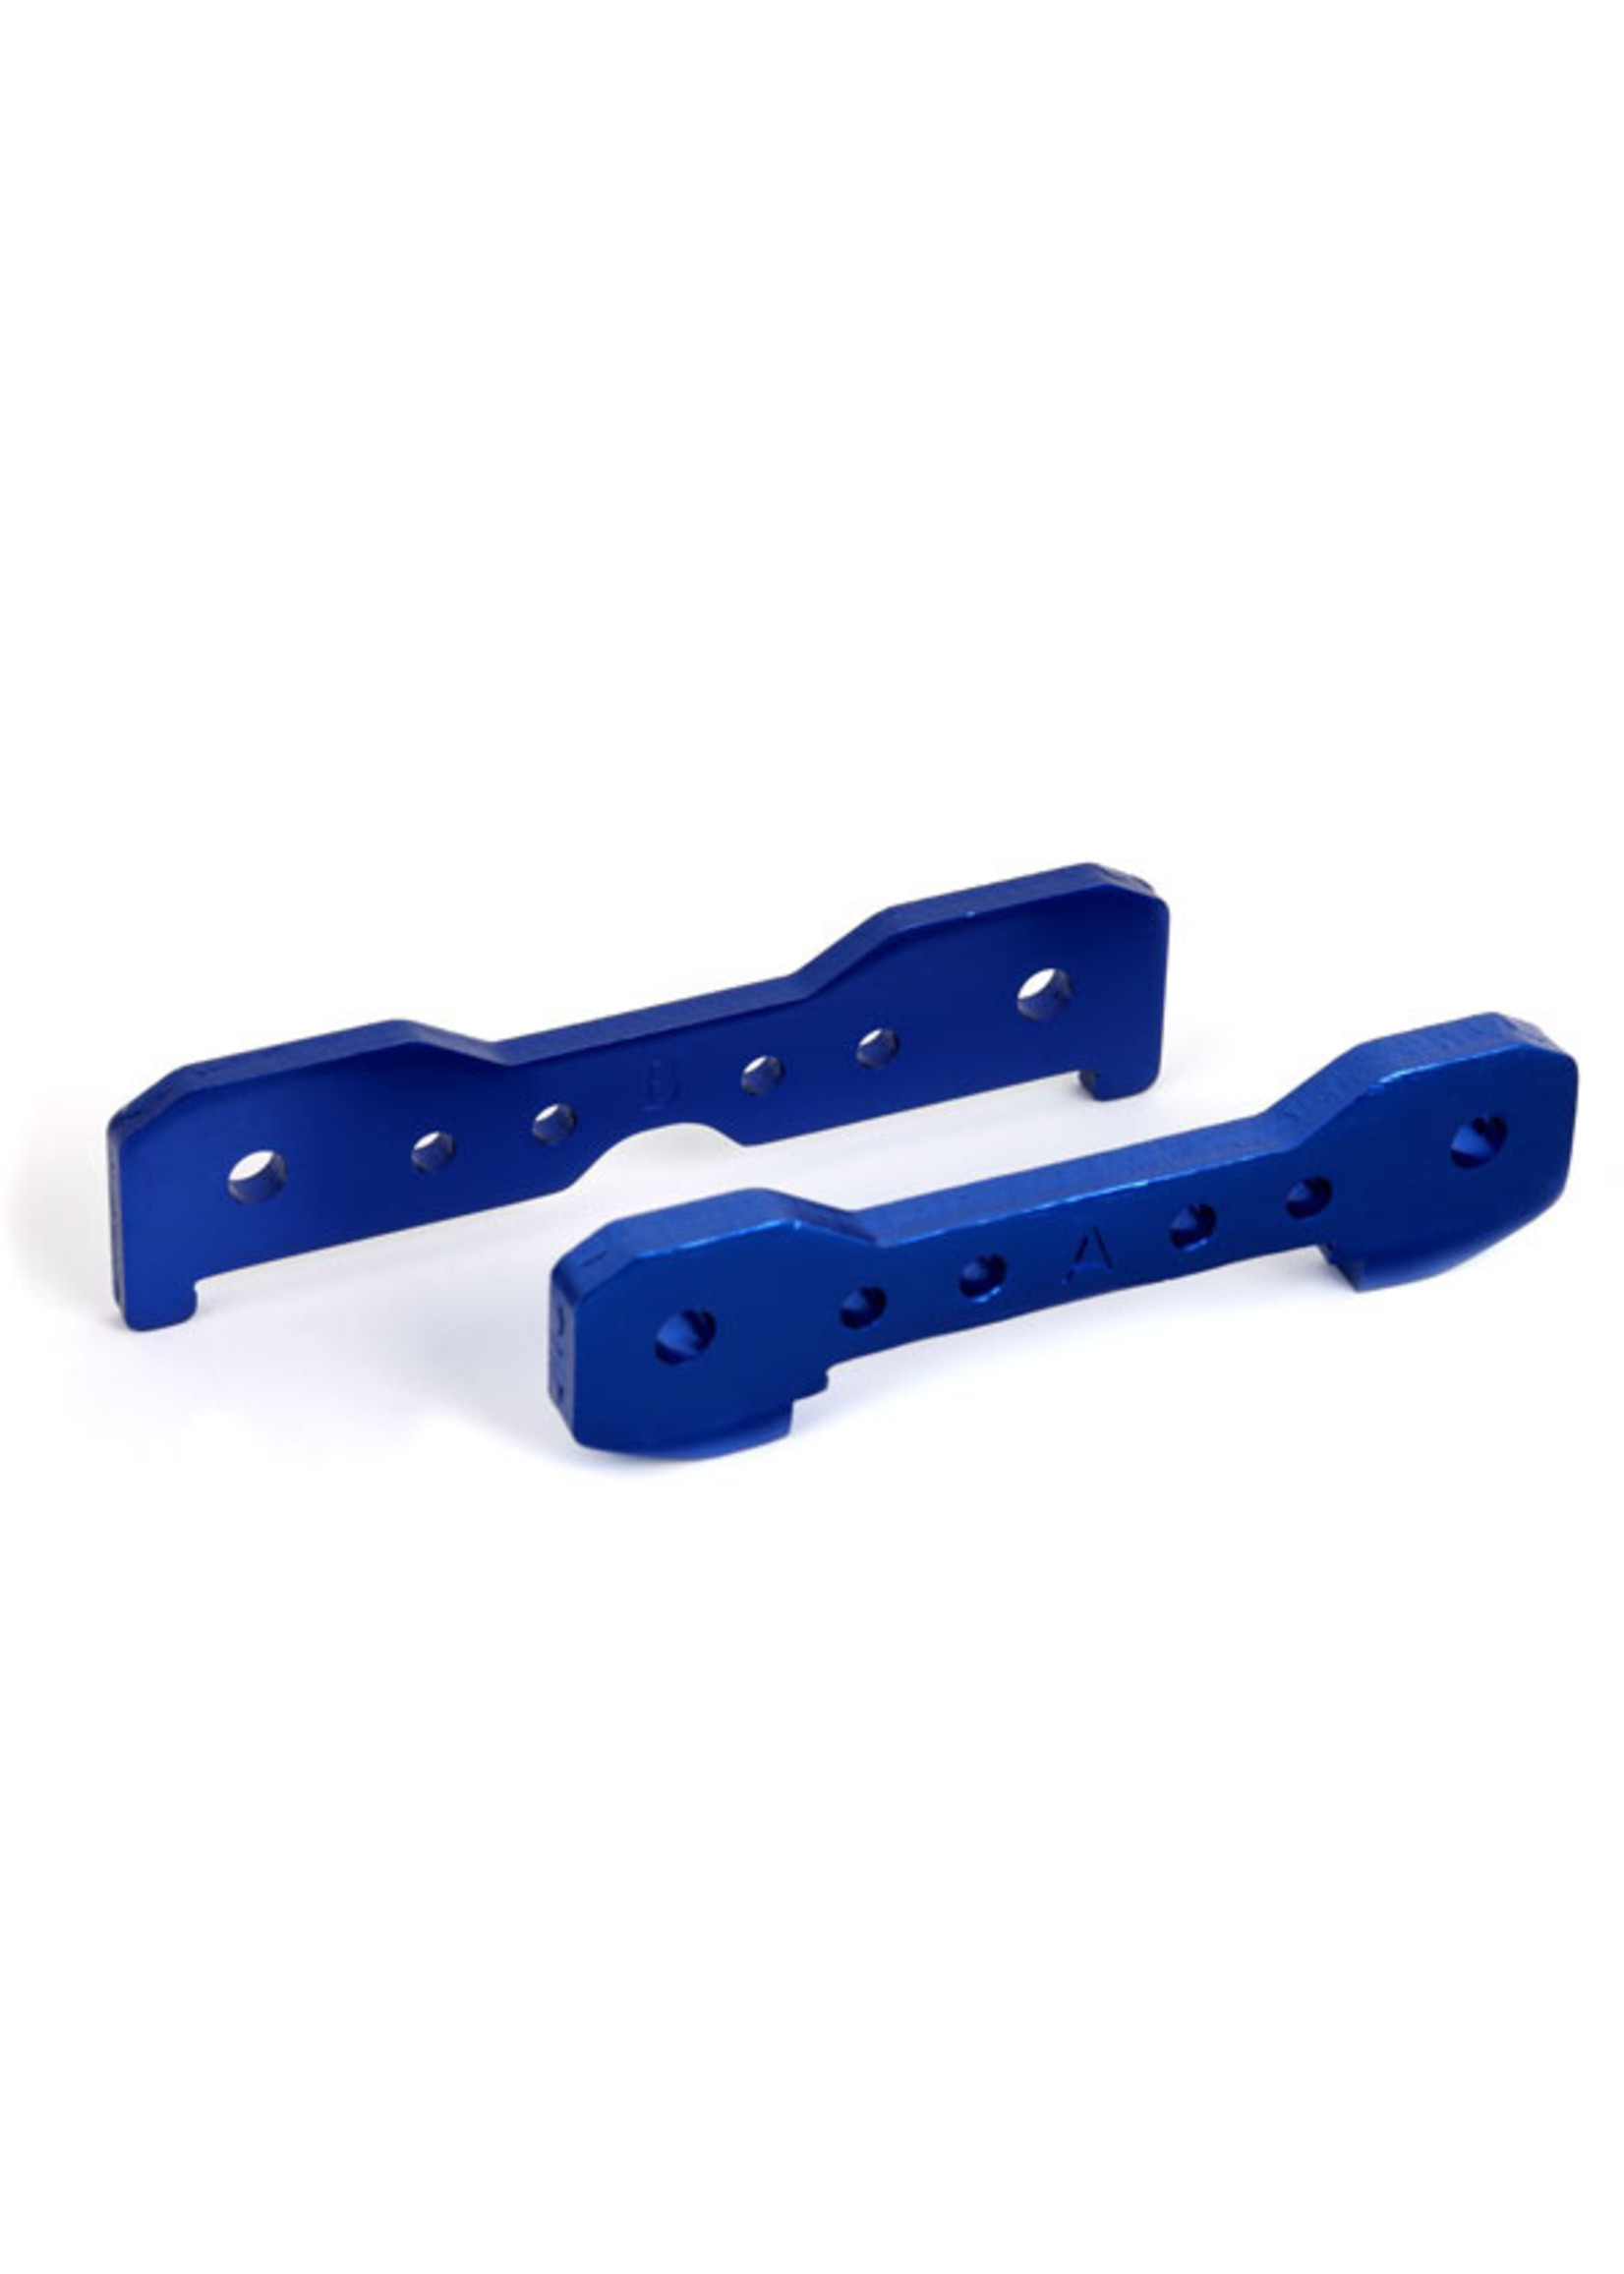 Traxxas 9527 - Front Tie Bars - Blue